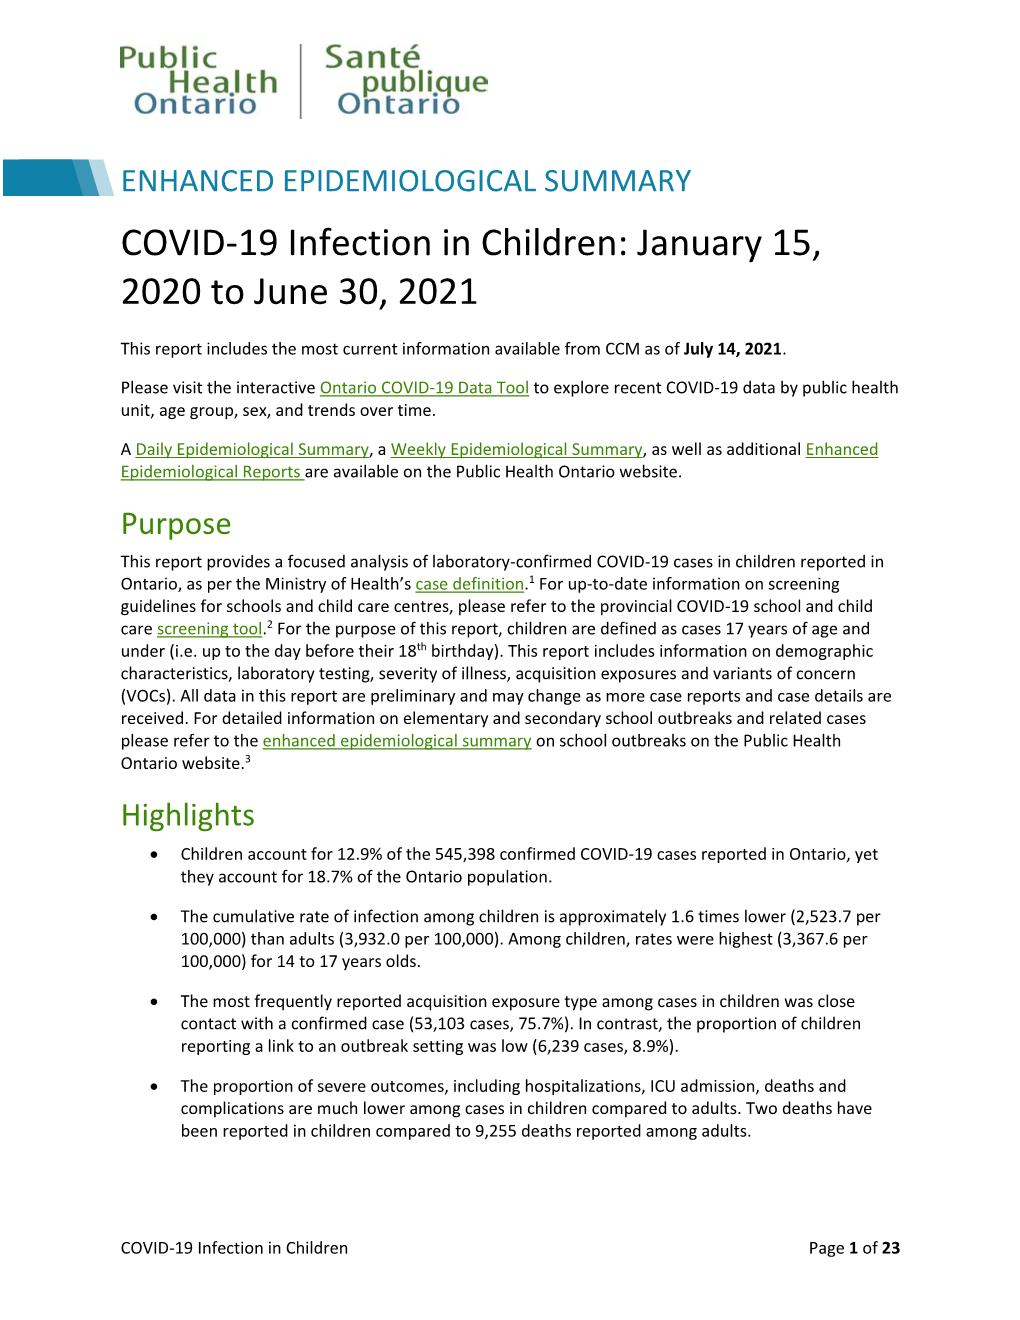 COVID-19 Infection in Children: January 15, 2020 to June 30, 2021